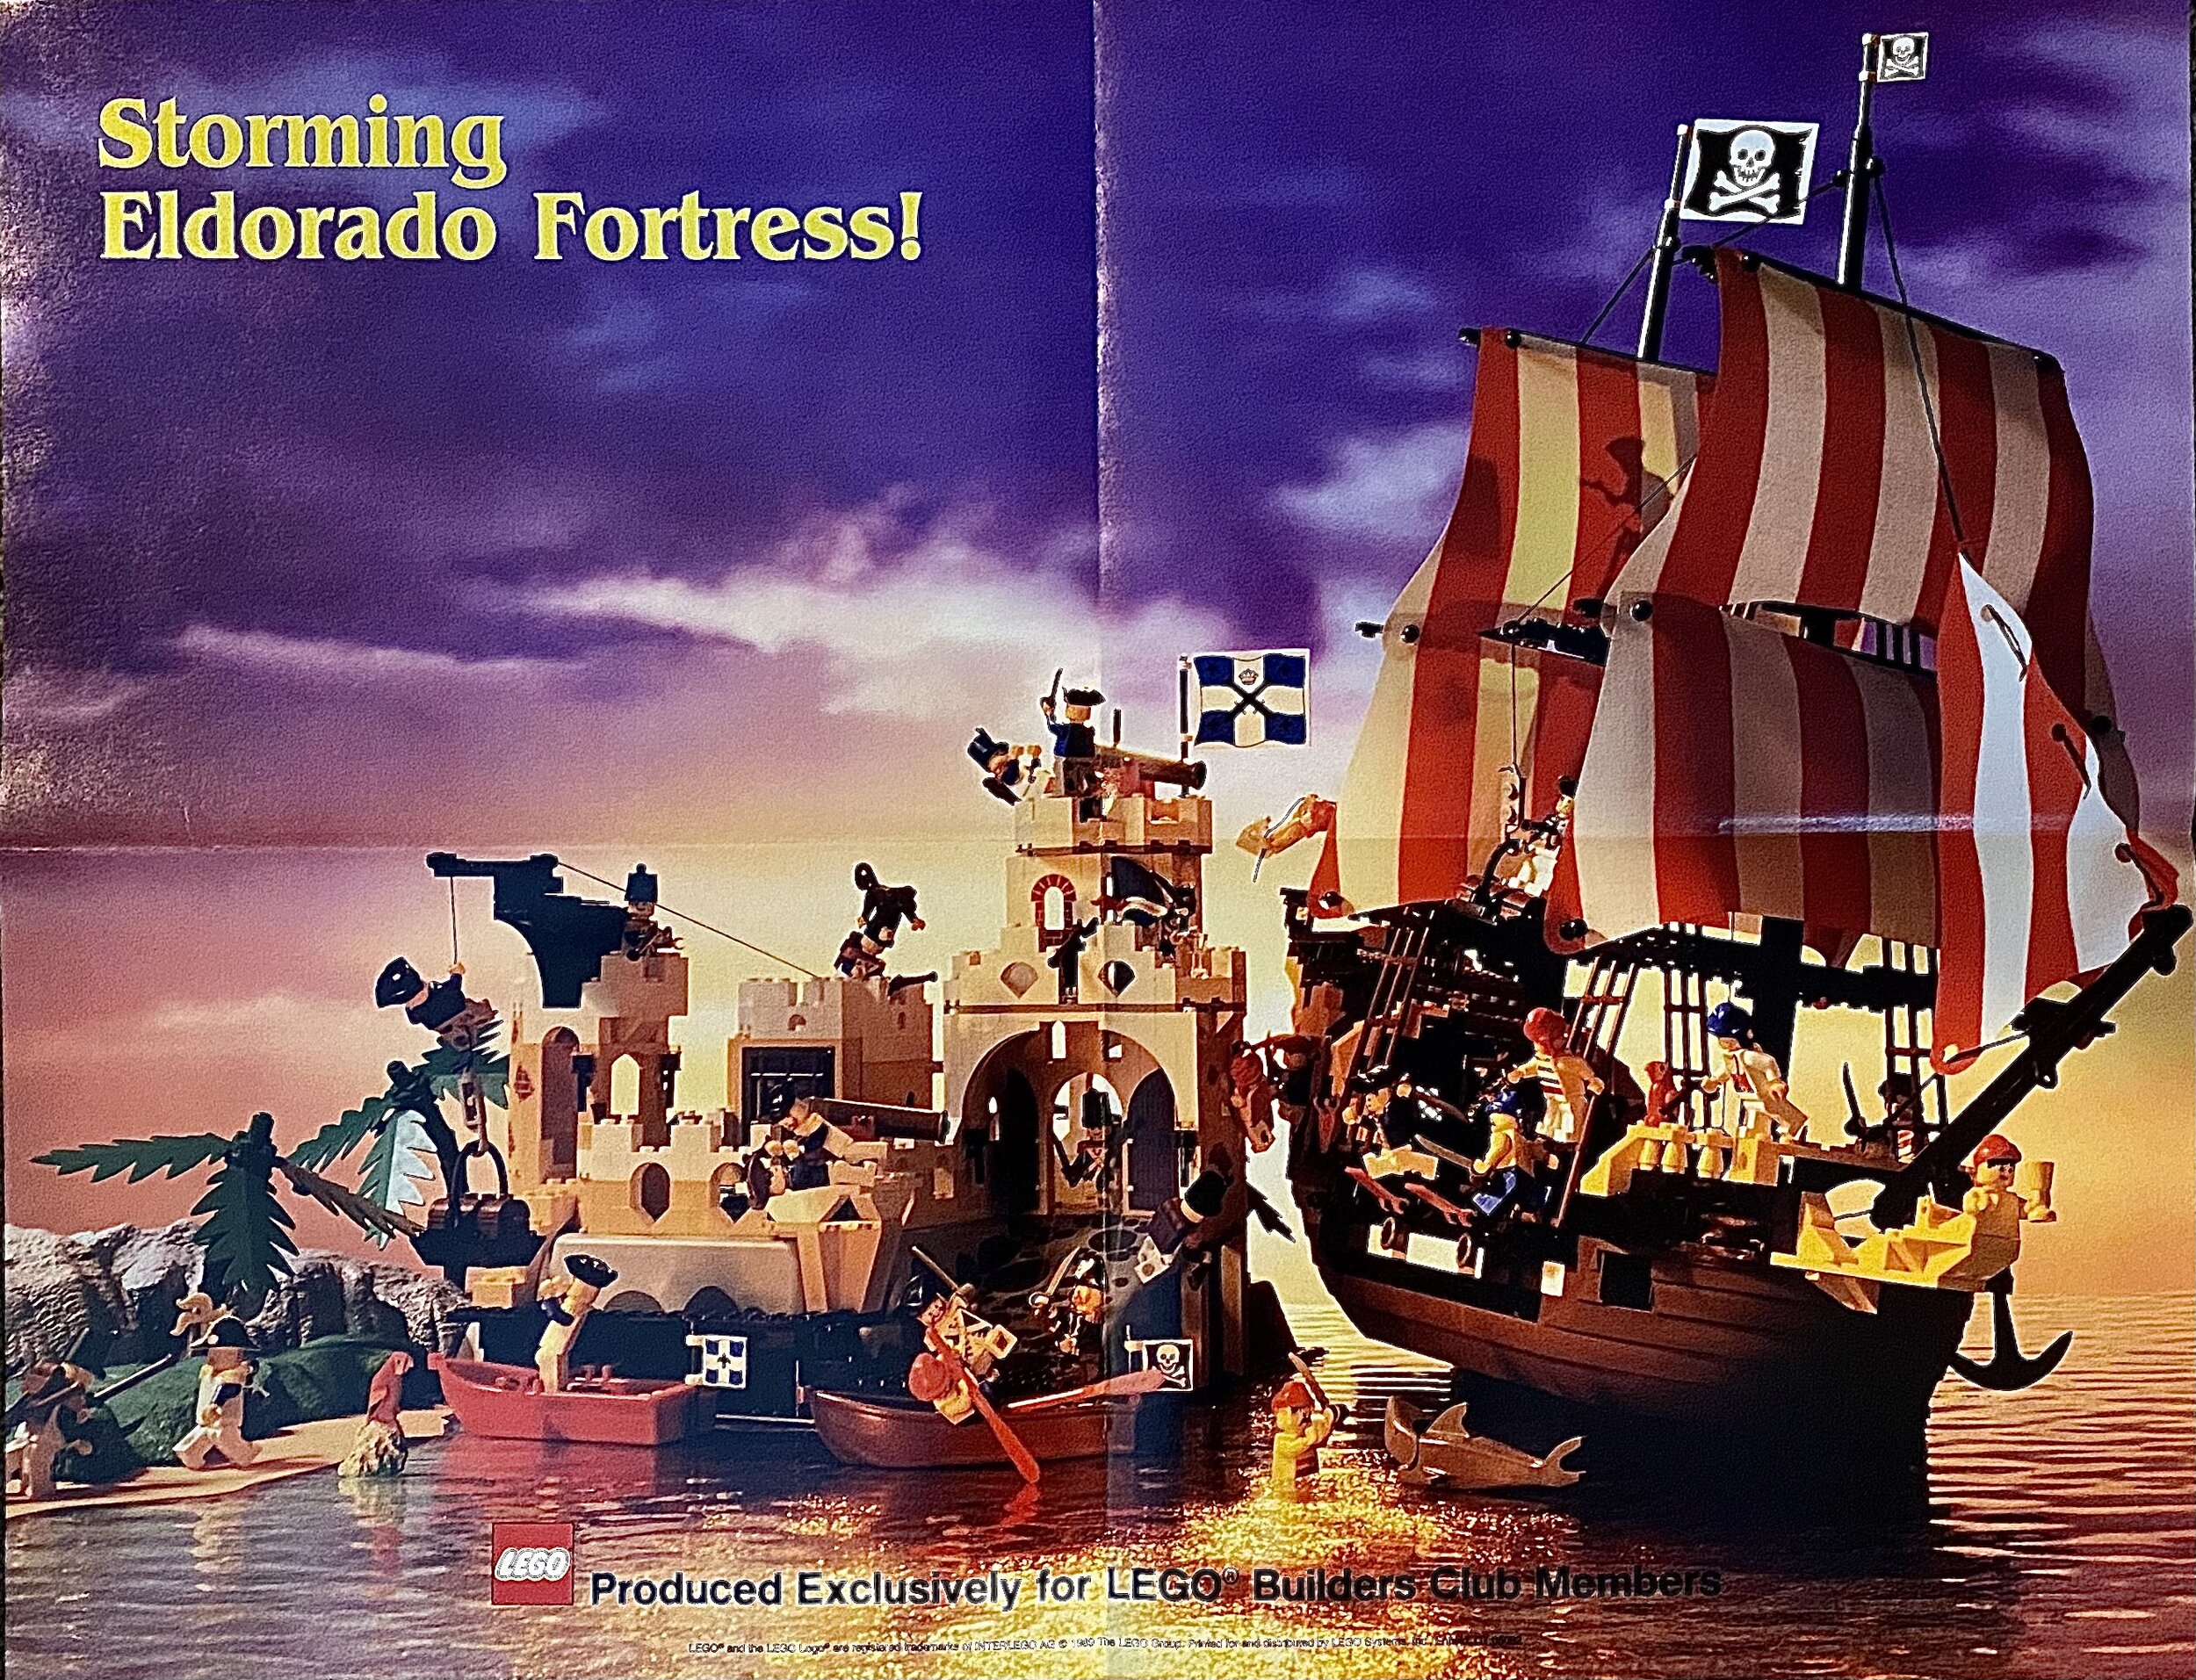 flyde over korrelat Herske Everything You Want to Know About LEGO Pirates - BrickNerd - All things LEGO  and the LEGO fan community